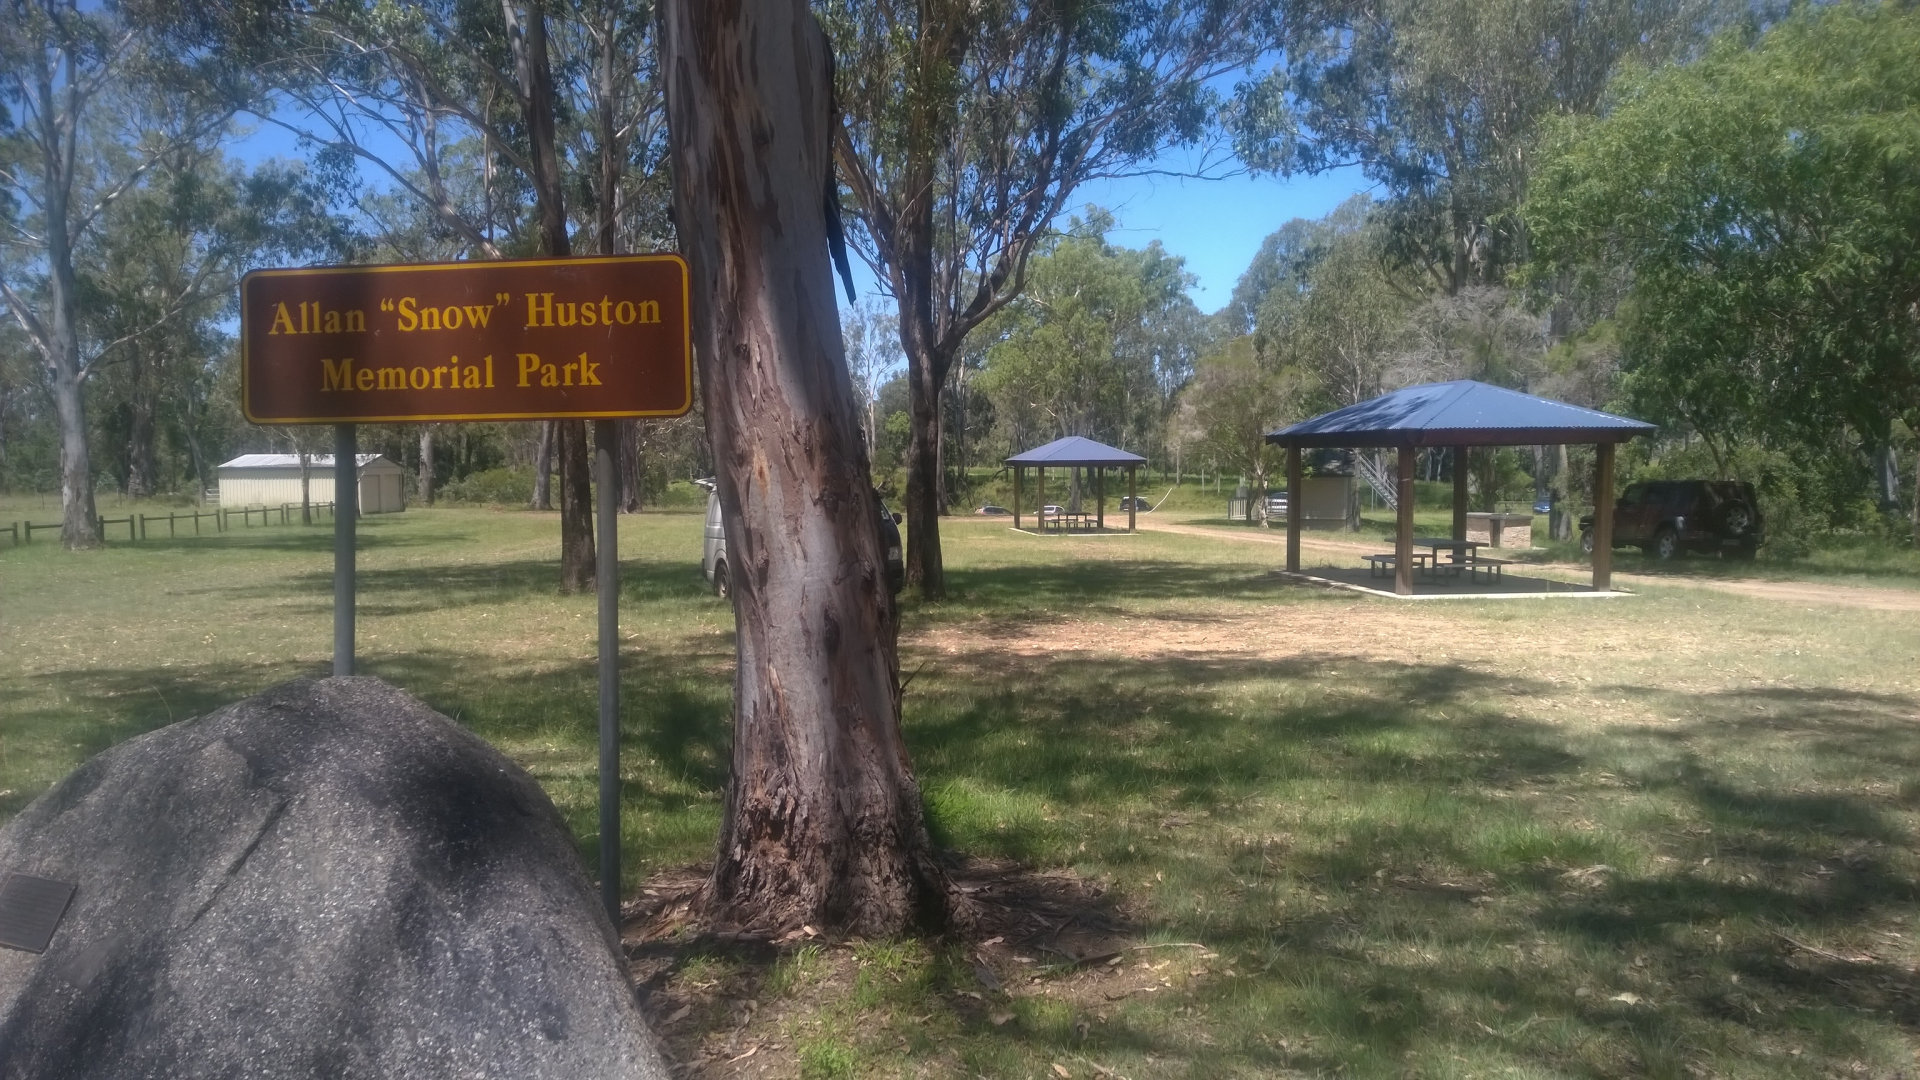 Allan "Snow" Huston Memorial Park, with picnic tables in the background. The park is between Murgon and Wondai along the Bunya Highway, a quiet rest stop away from the Bunya Highway